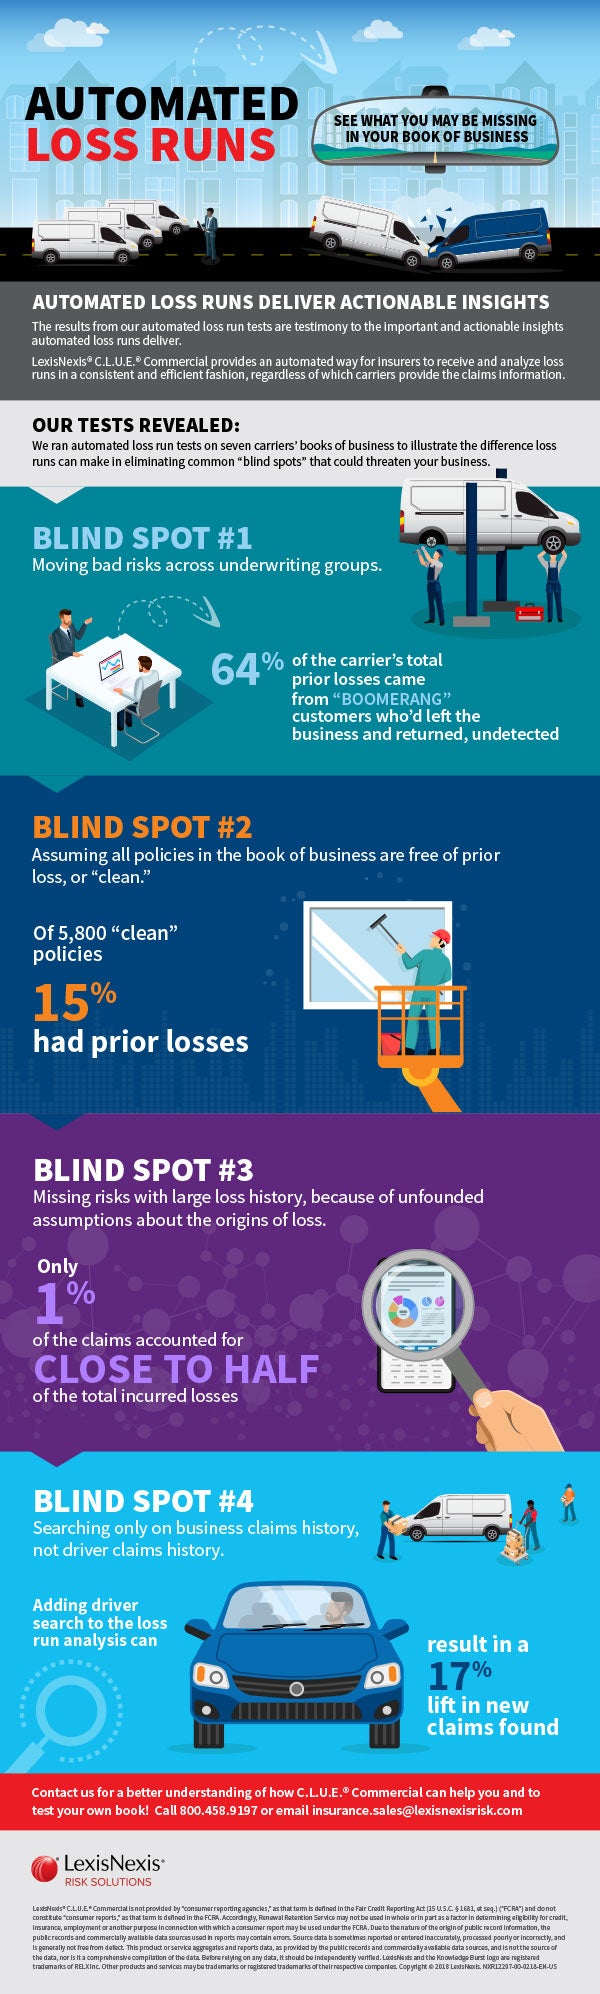 CLUE Commercial Blind Spot Infographic